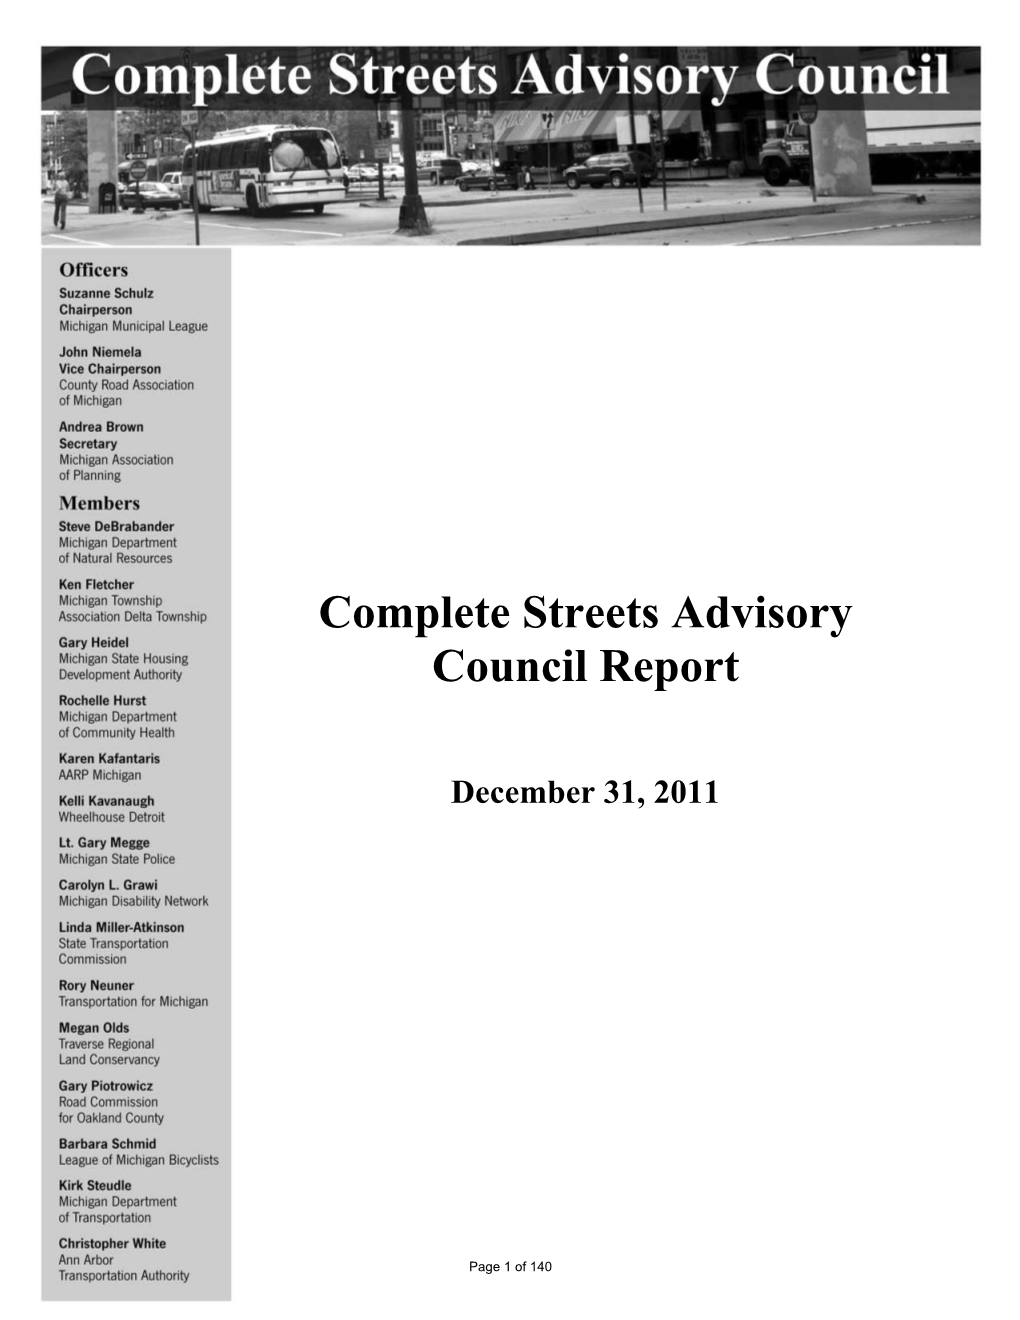 Complete Streets Advisory Council Report